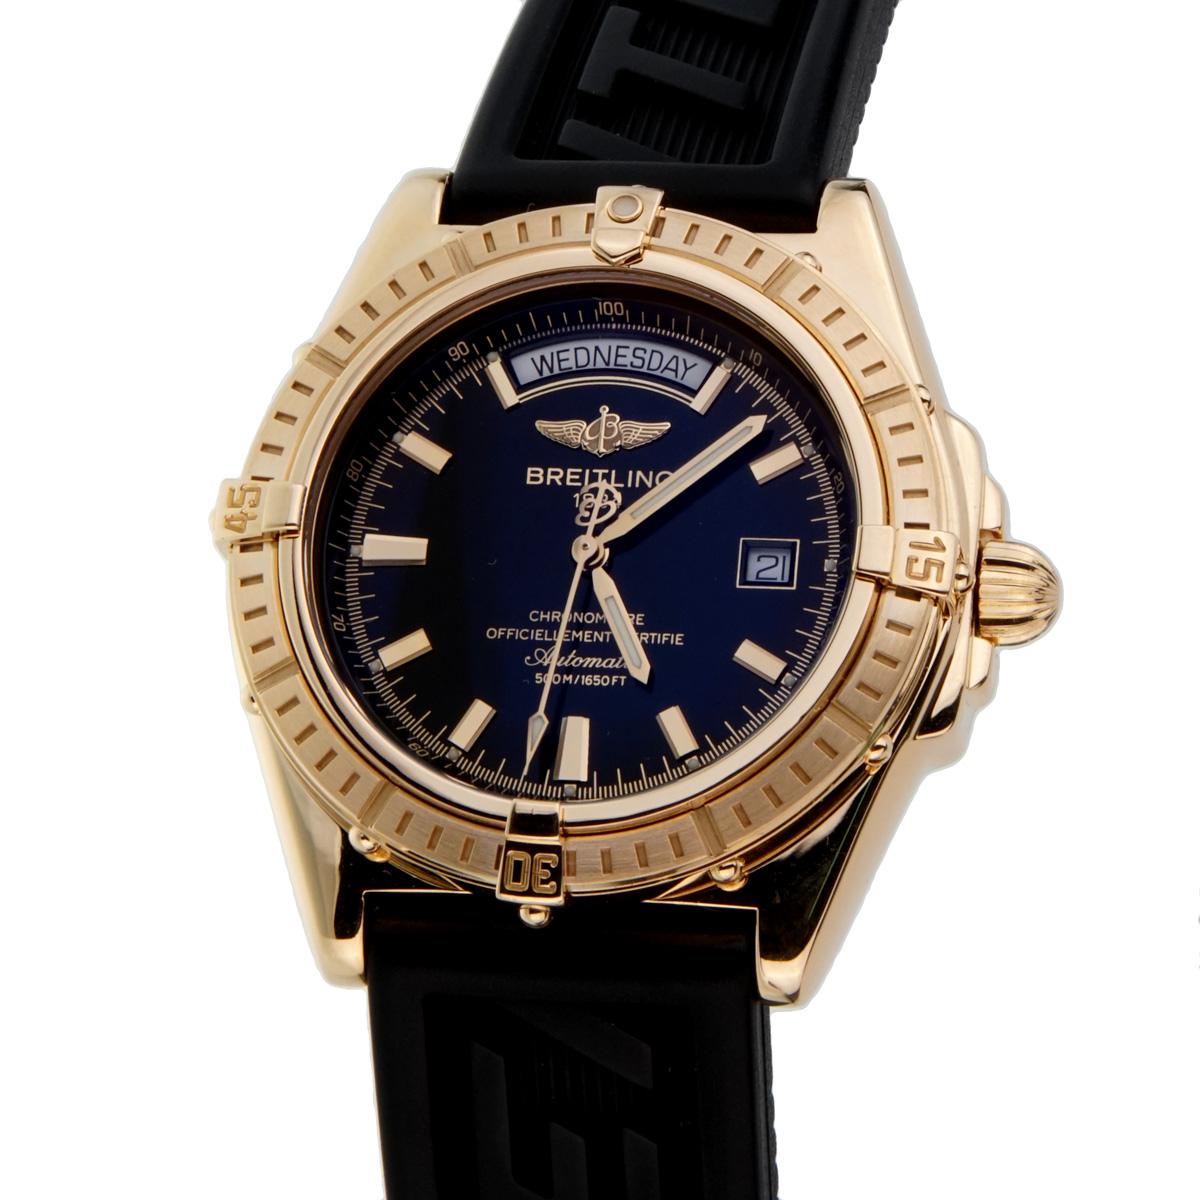 A certified authentic Breitling 18k yellow gold watch featuring a black dial, sports diver black strap, sapphire crystal, unidirectional bezel, with an 18k gold tang buckle. The watch measures 44mm.